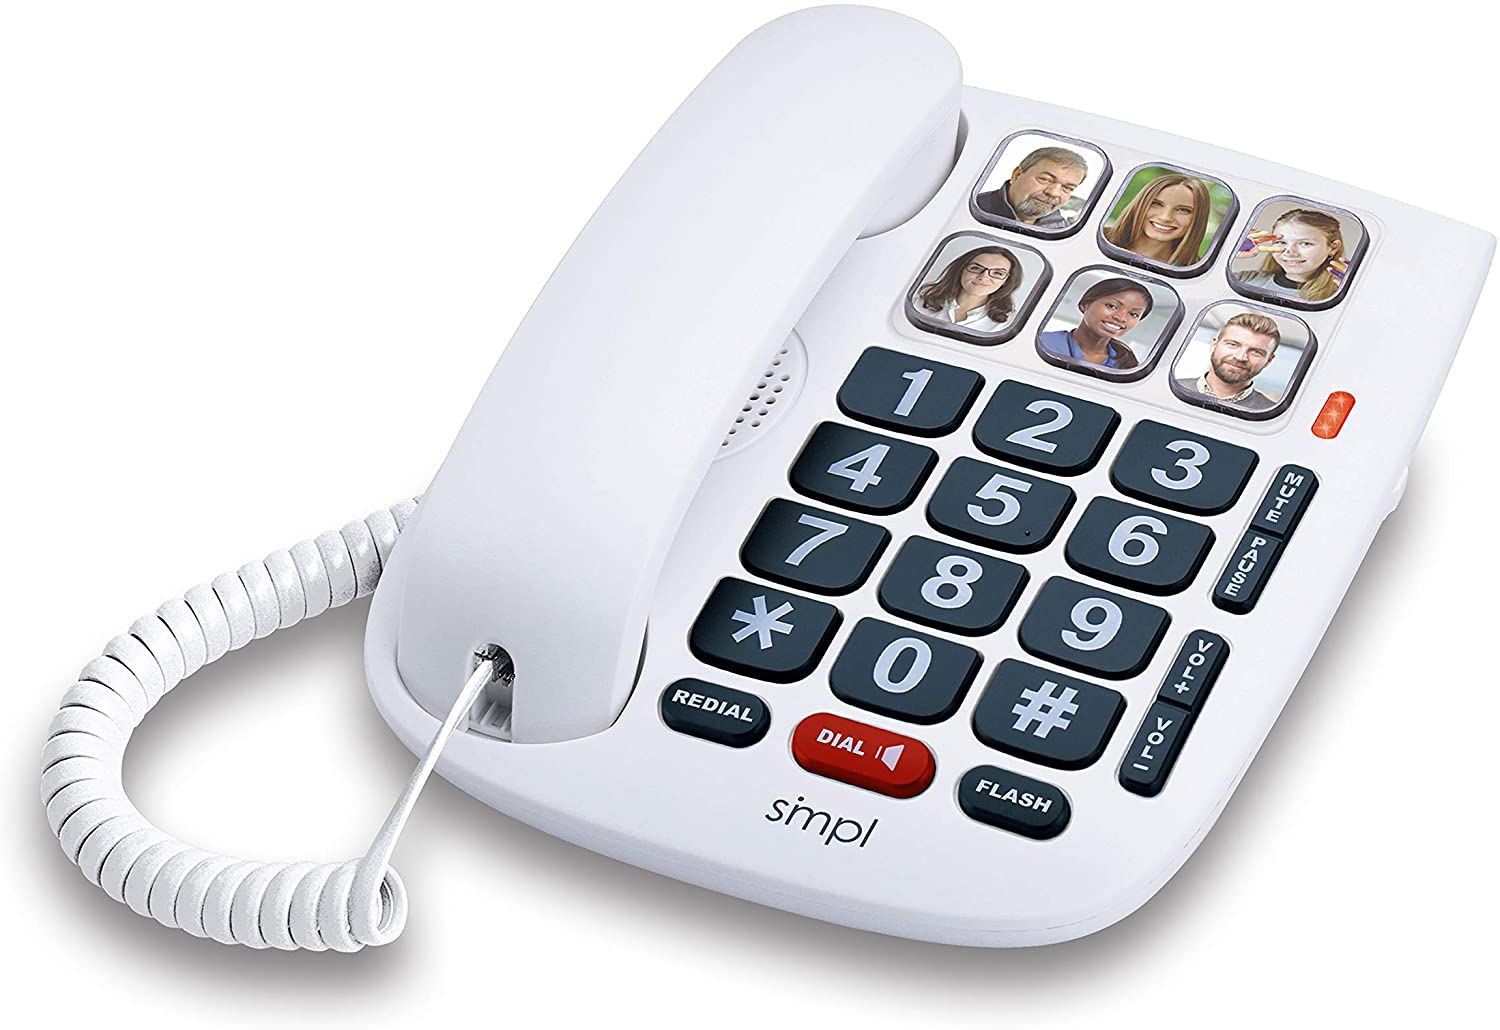 | SMPL Hands Free Dial Photo Memory Corded Phone